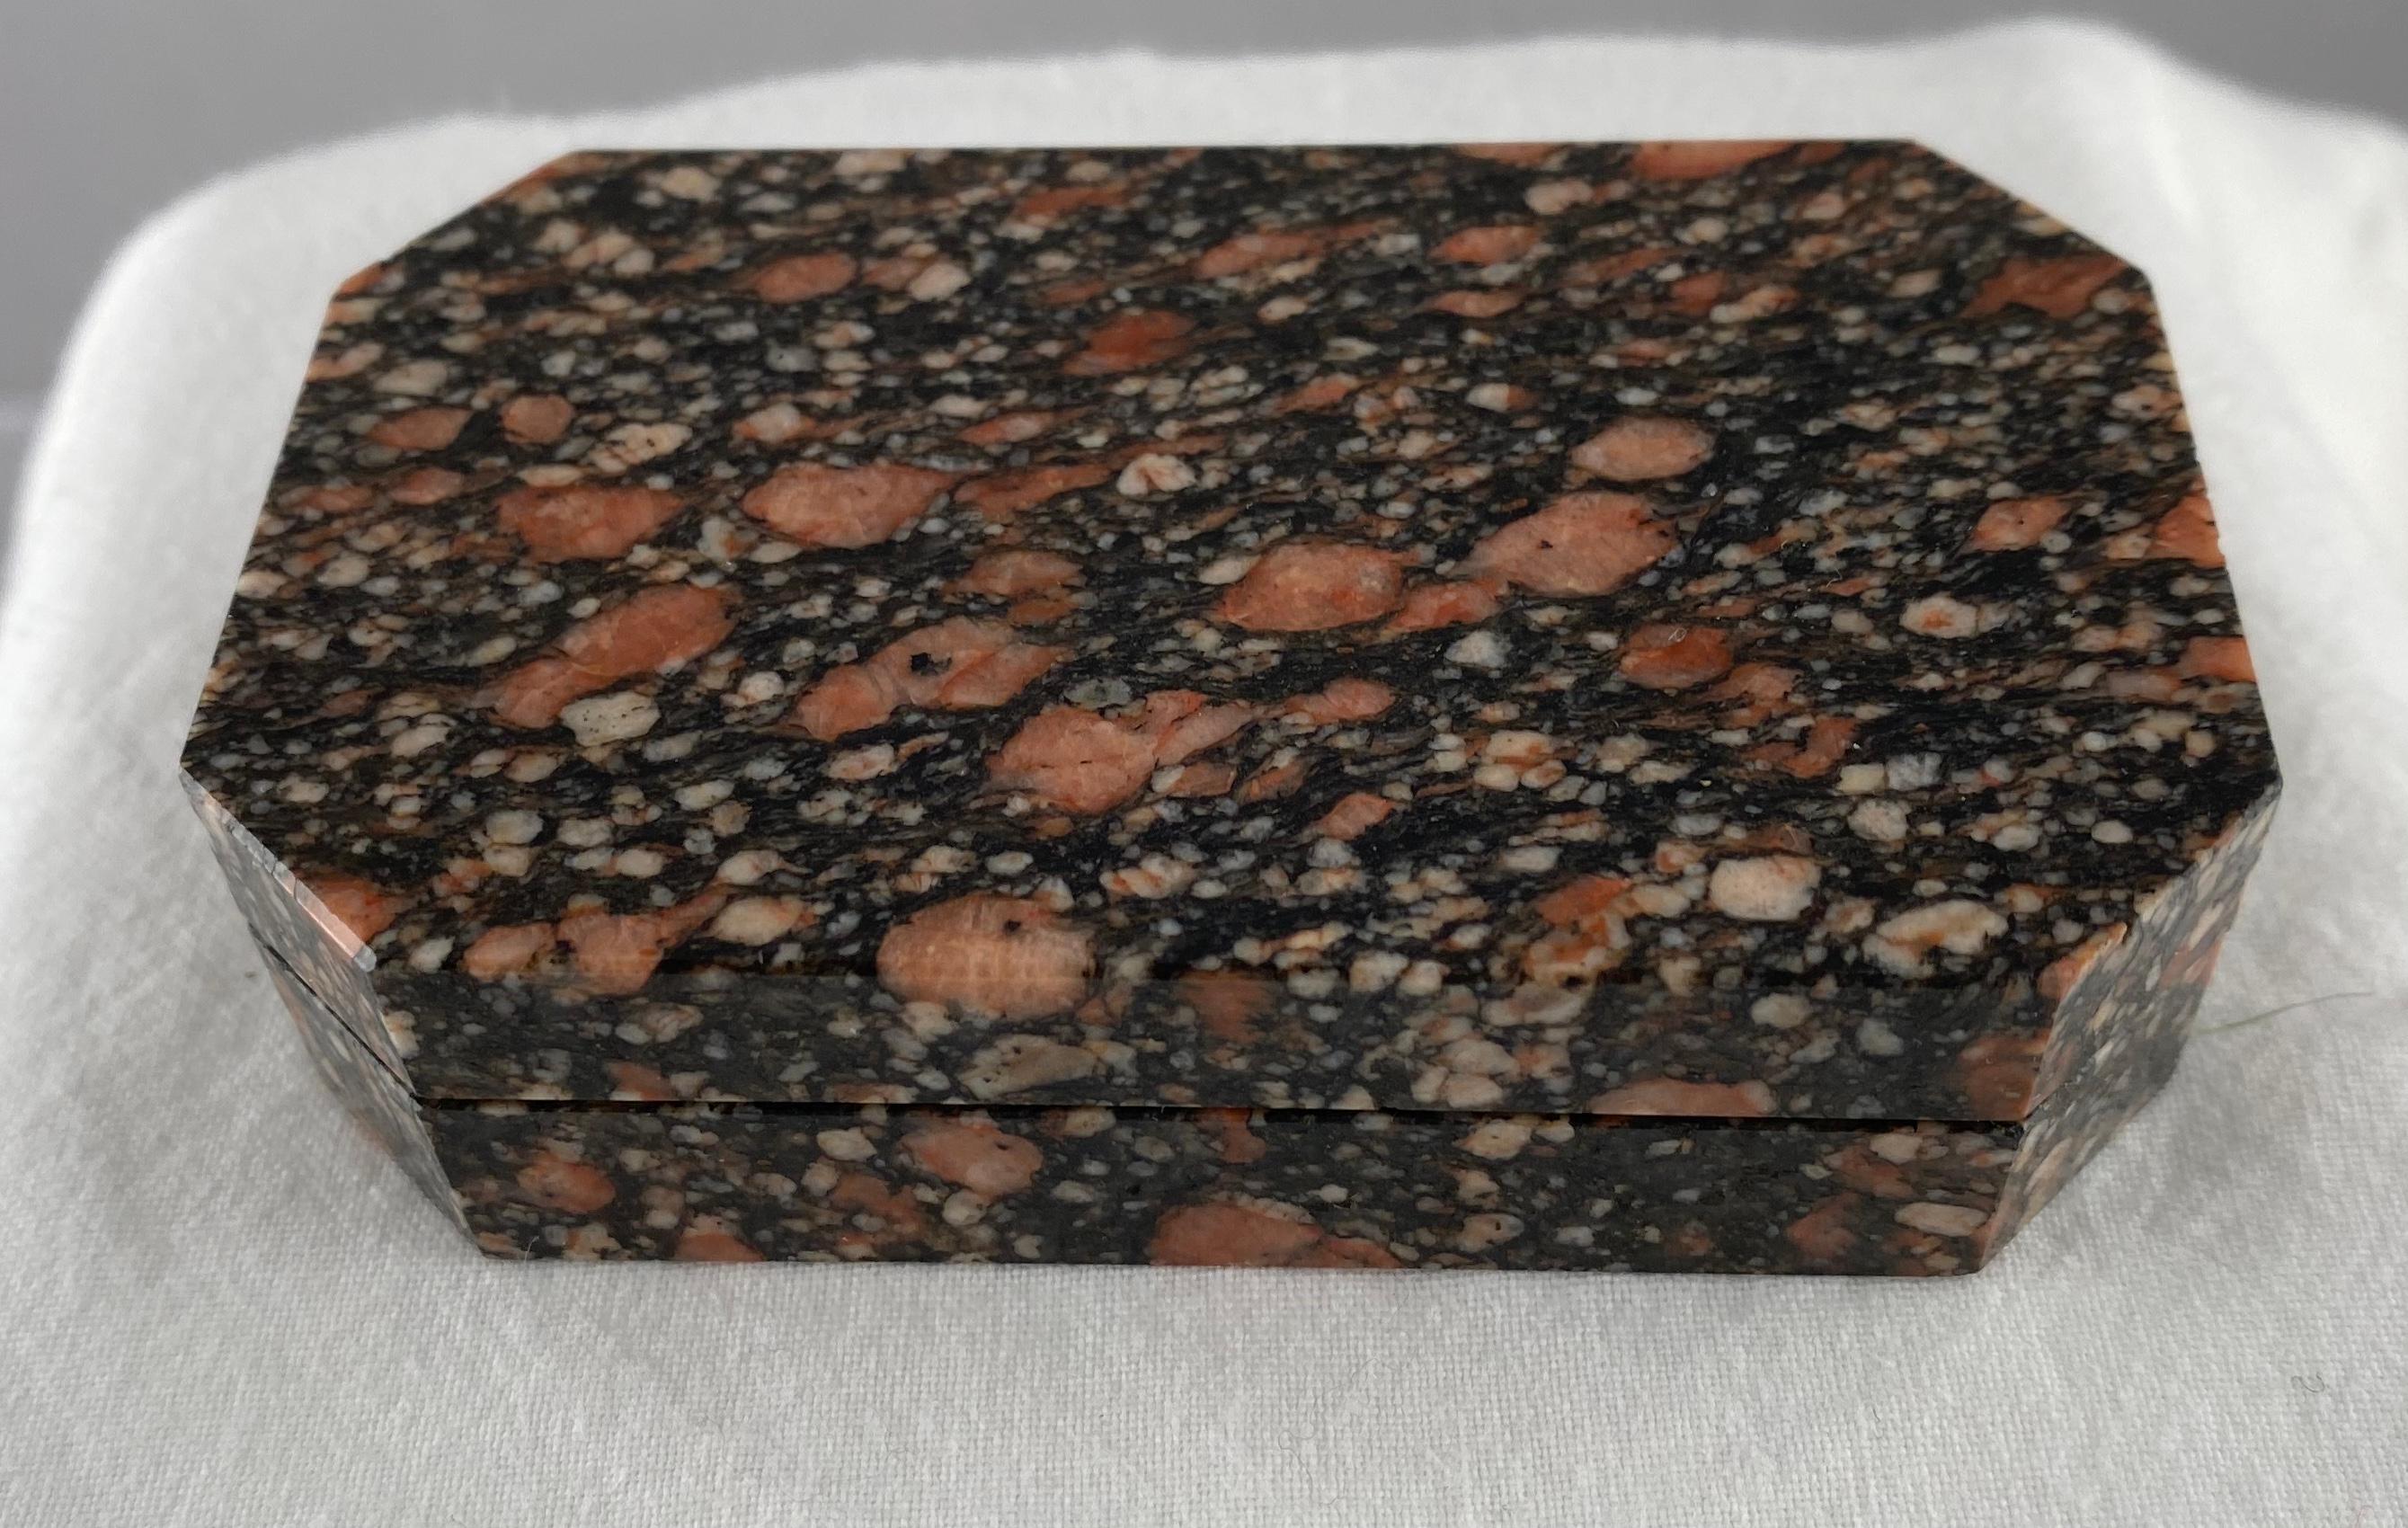 A small masterpiece. A rectangular box made of porphyry. Top design and quality. Alos a very unusual type of porphyry. 
The craftsmanship is spectacular.